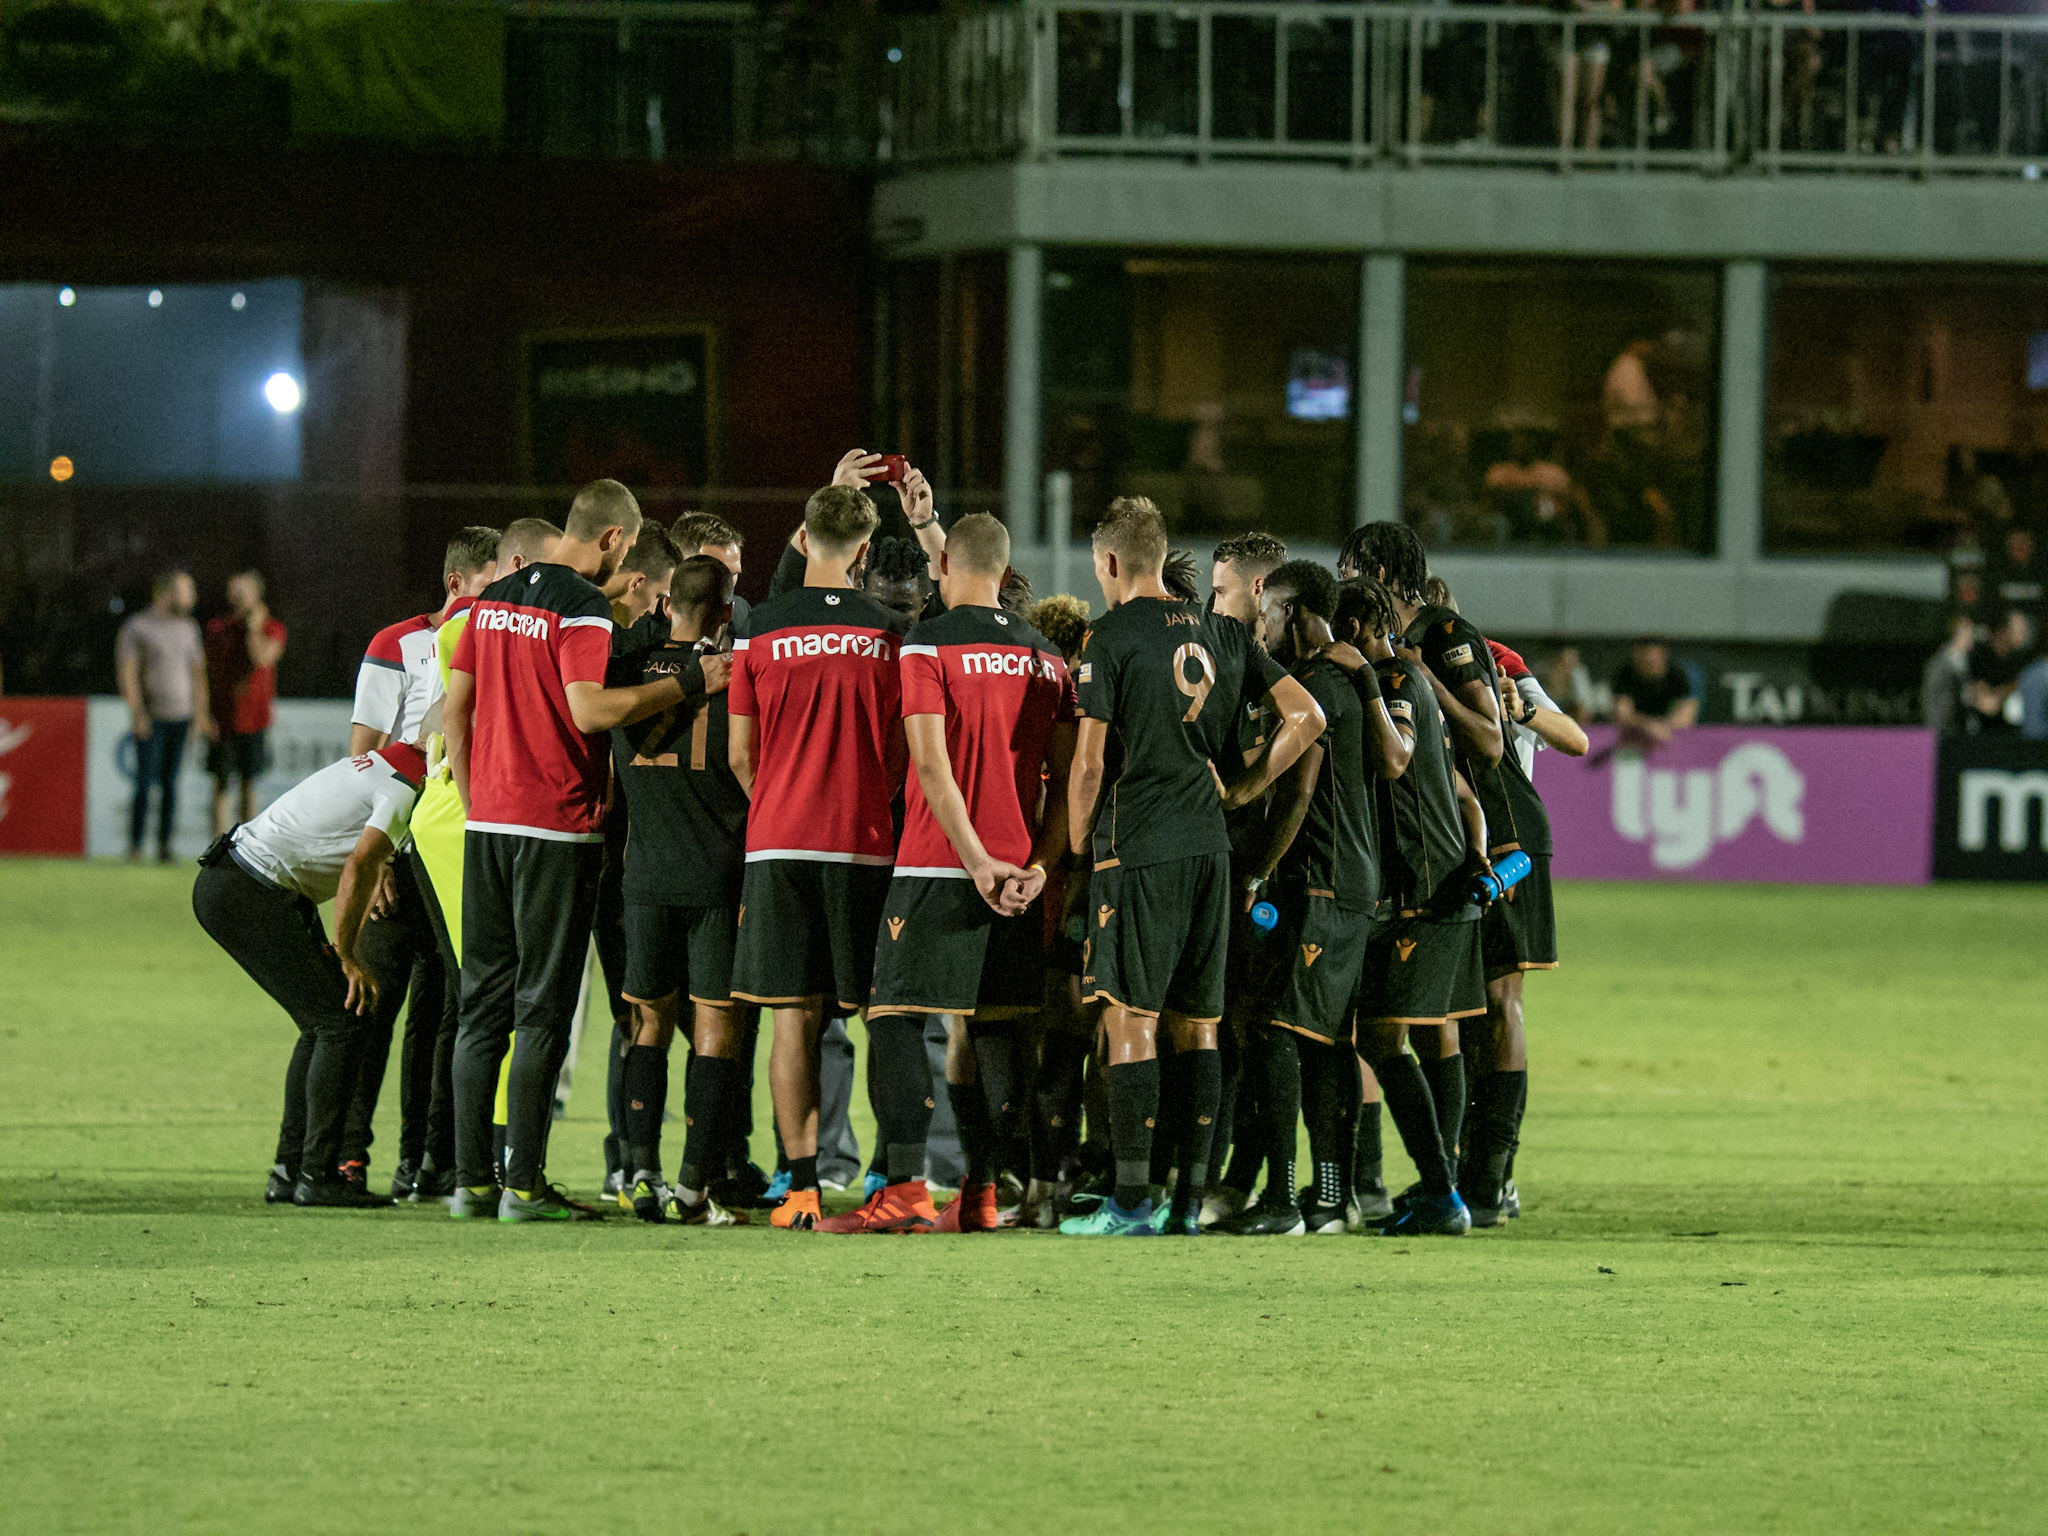 PREVIEW: Rising (and Firebird Soccer!) Travel to Portland for Last Road Match of the Season